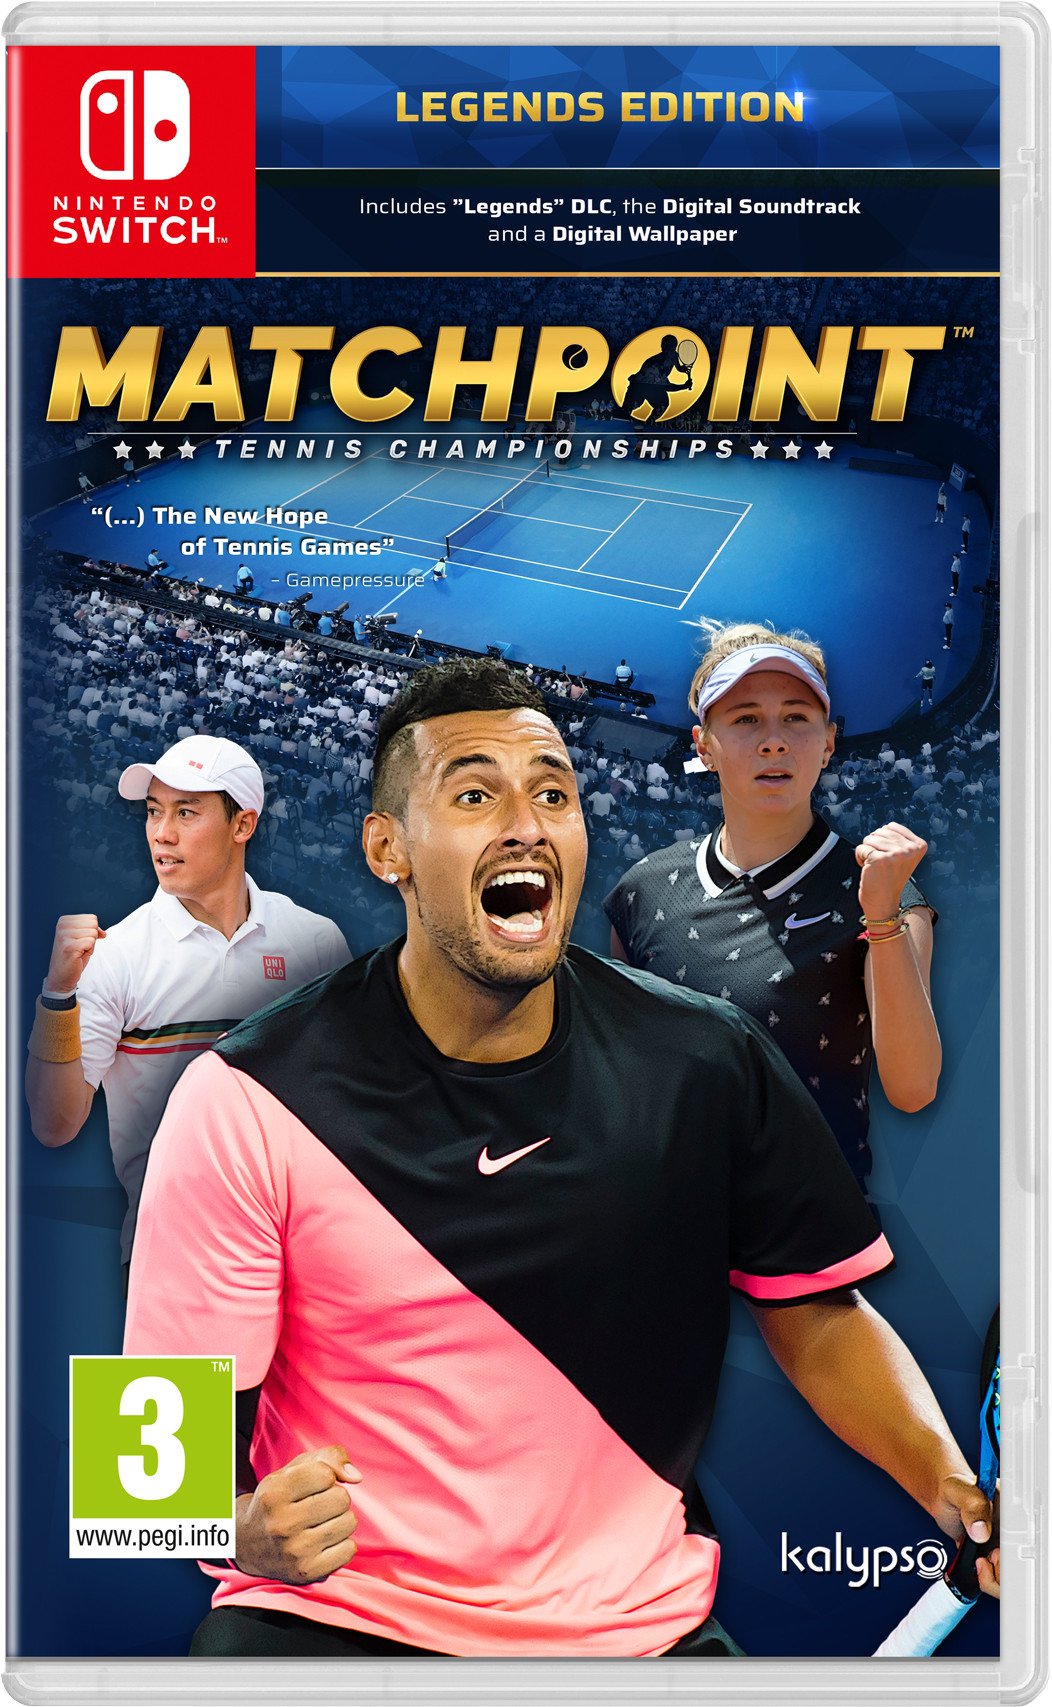 Matchpoint - Tennis Championships Legends Edition - Nintendo Switch